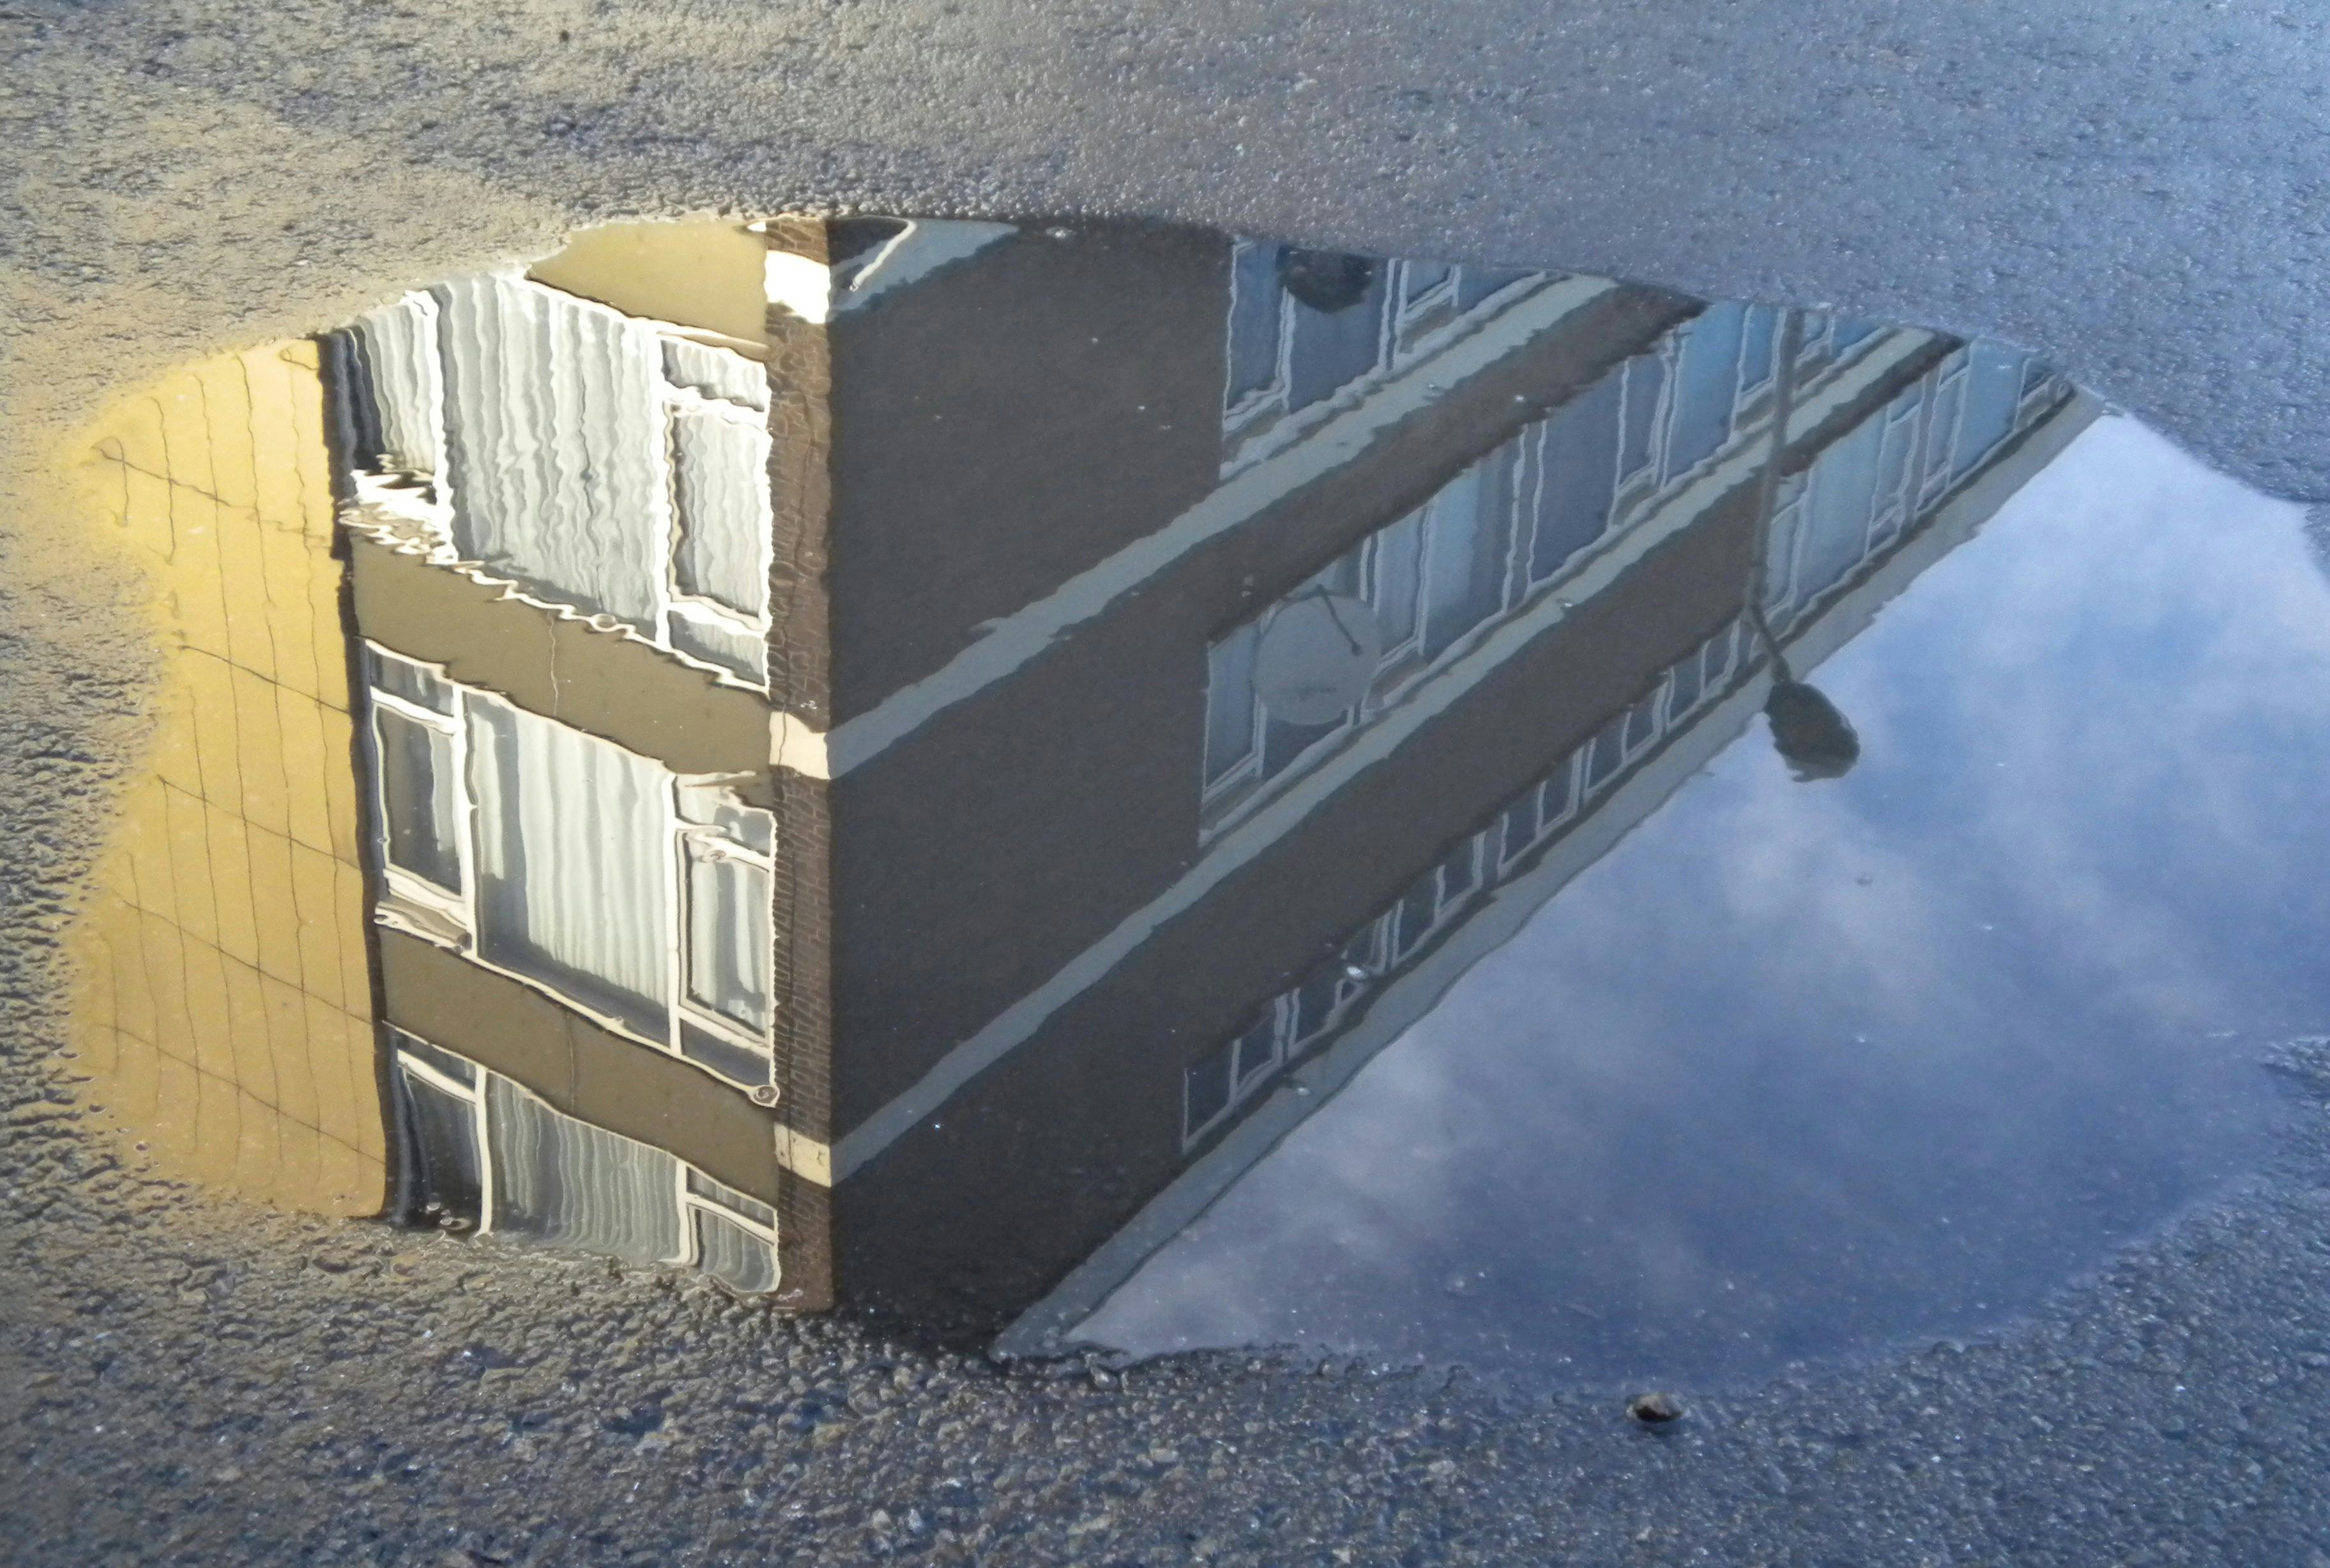 Picture of a water pool on the street, with a building reflected